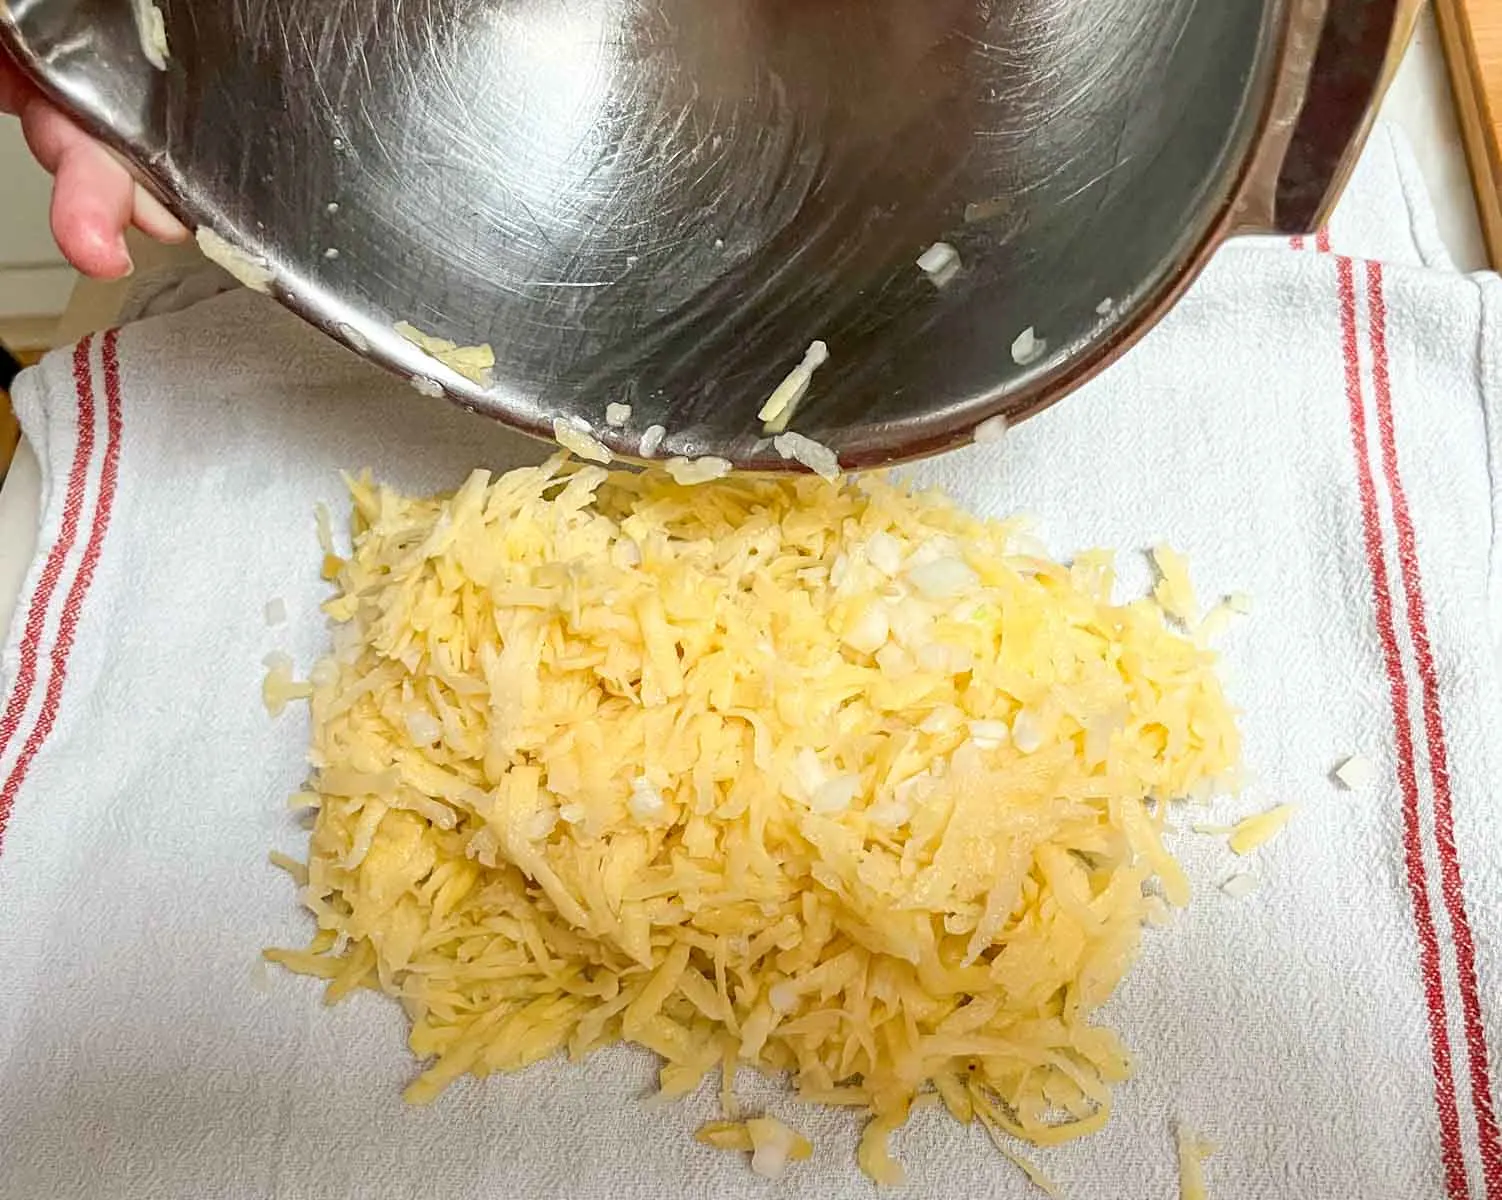 Grated potatoes and chopped onions being placed in a kitchen towel before wringing